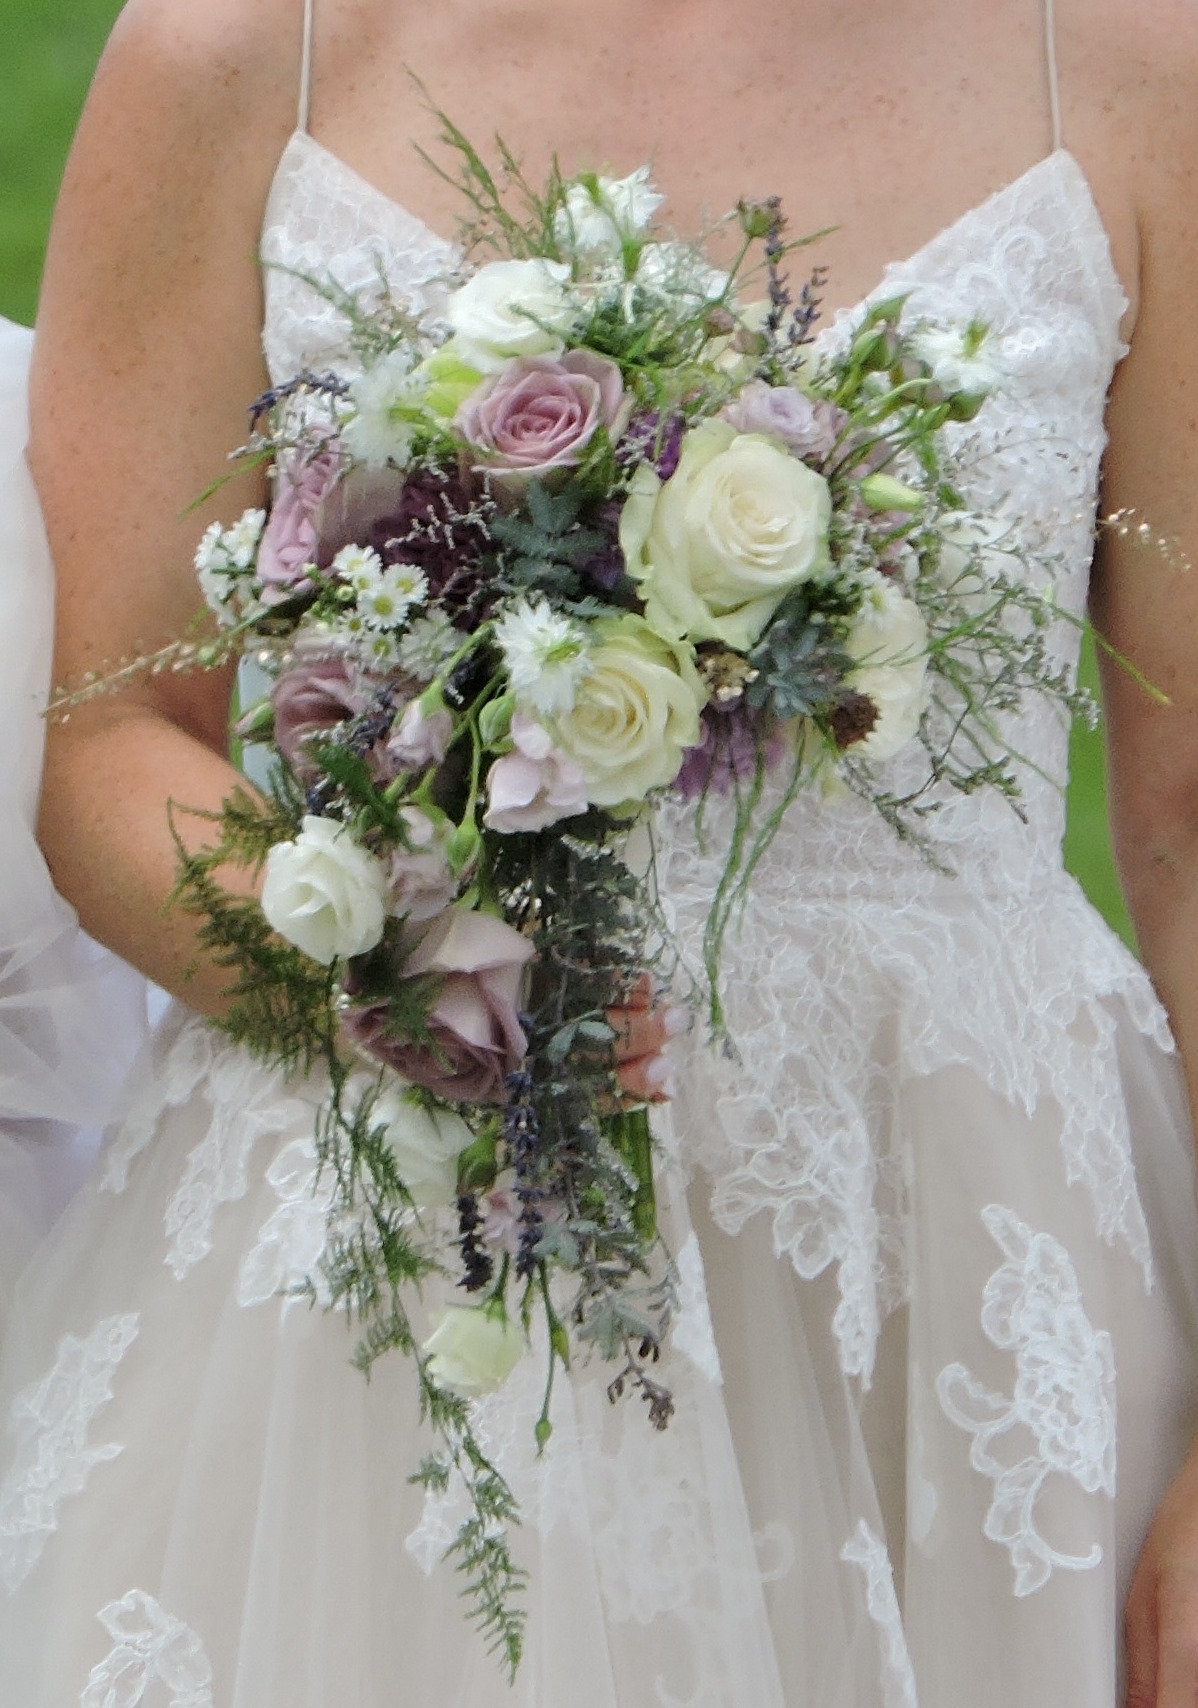  Romantic, cascade bouquet with fine textures evoking feelings of lace 